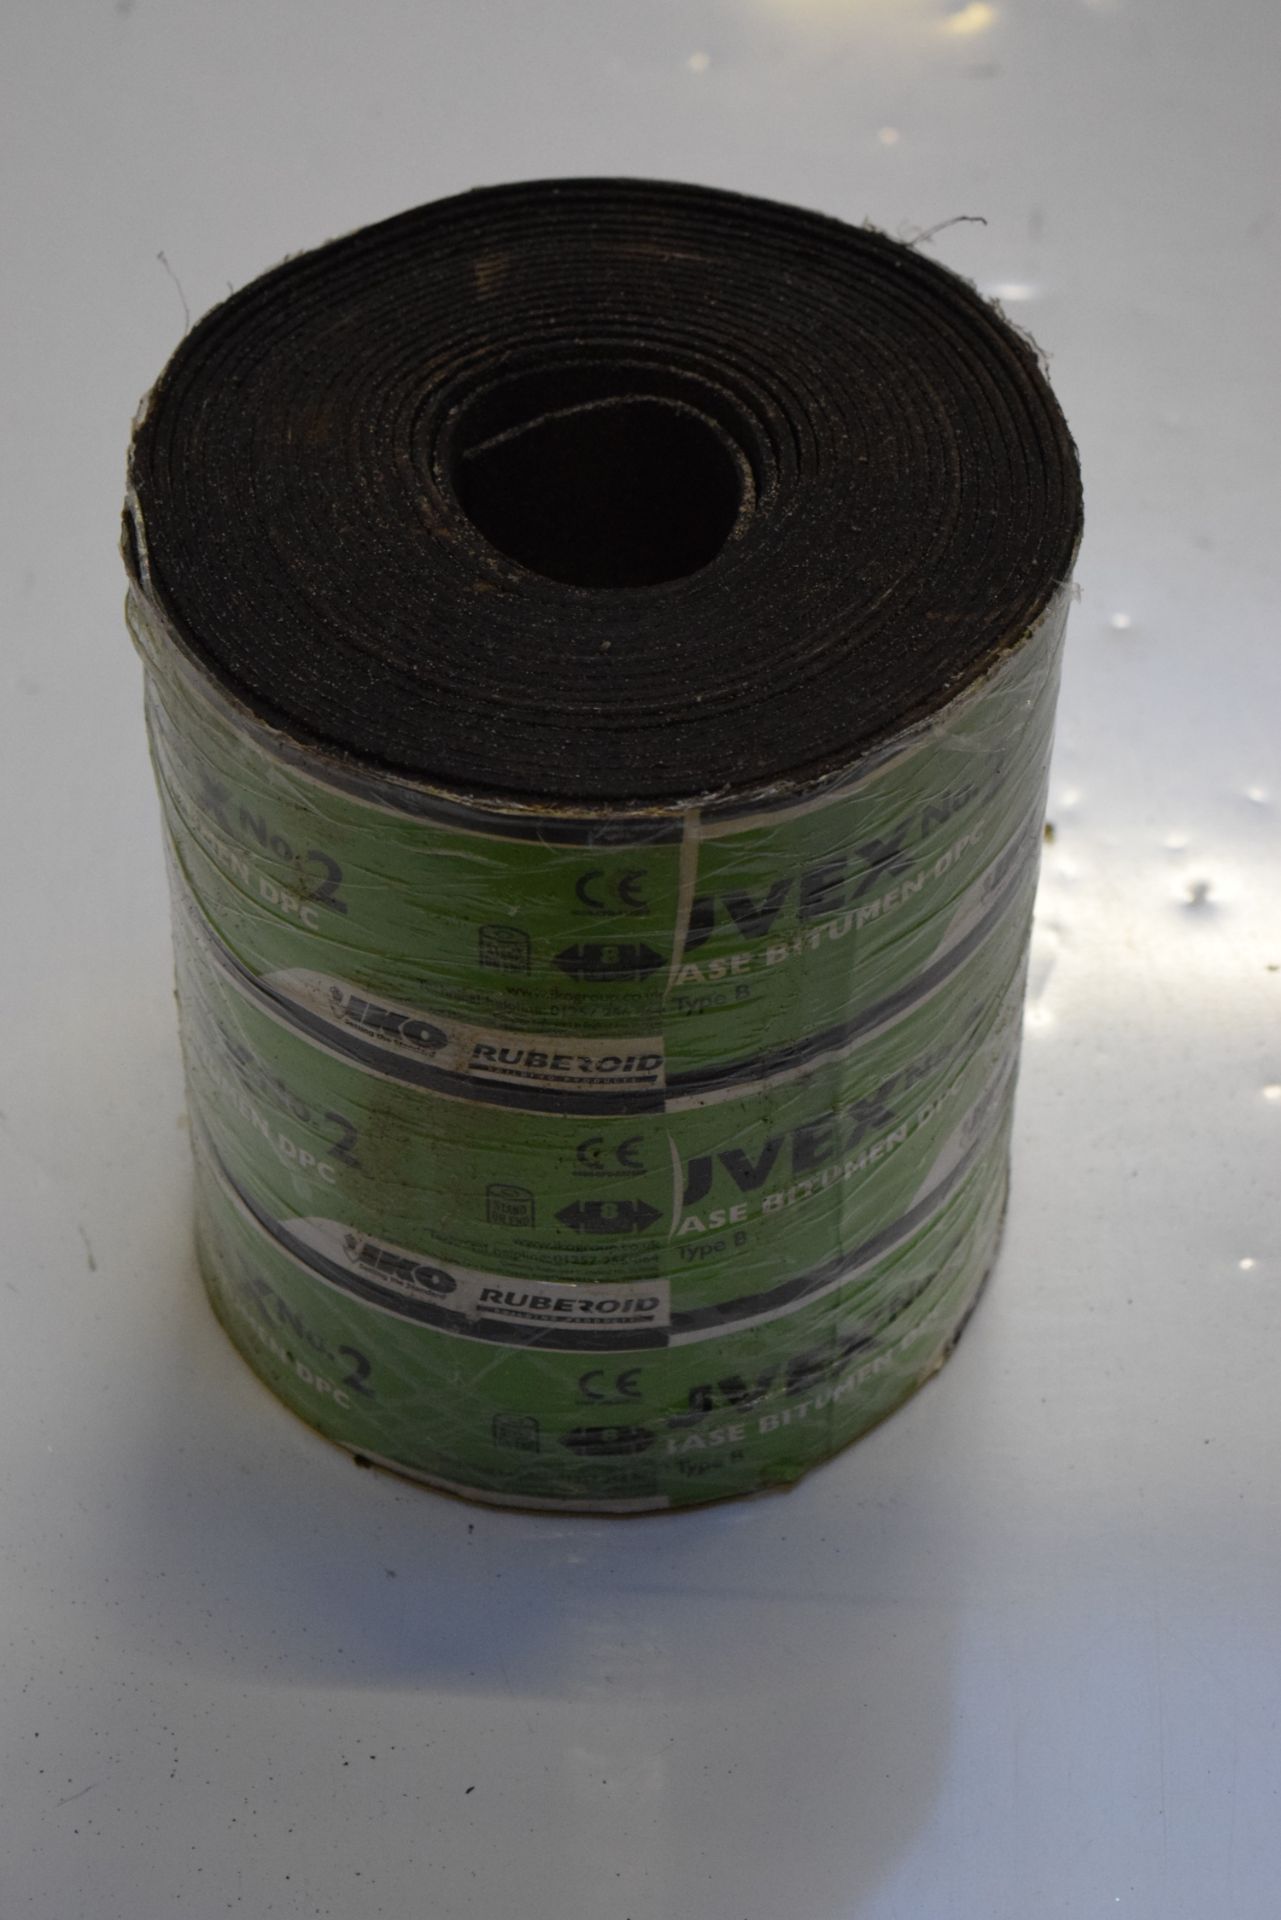 1 x PLUVEX NO 2 FIBRE BASE BITUMEN DPC *PLEASE NOTE THAT THE BID PRICE IS MULTIPLIED BY THE NUMBER